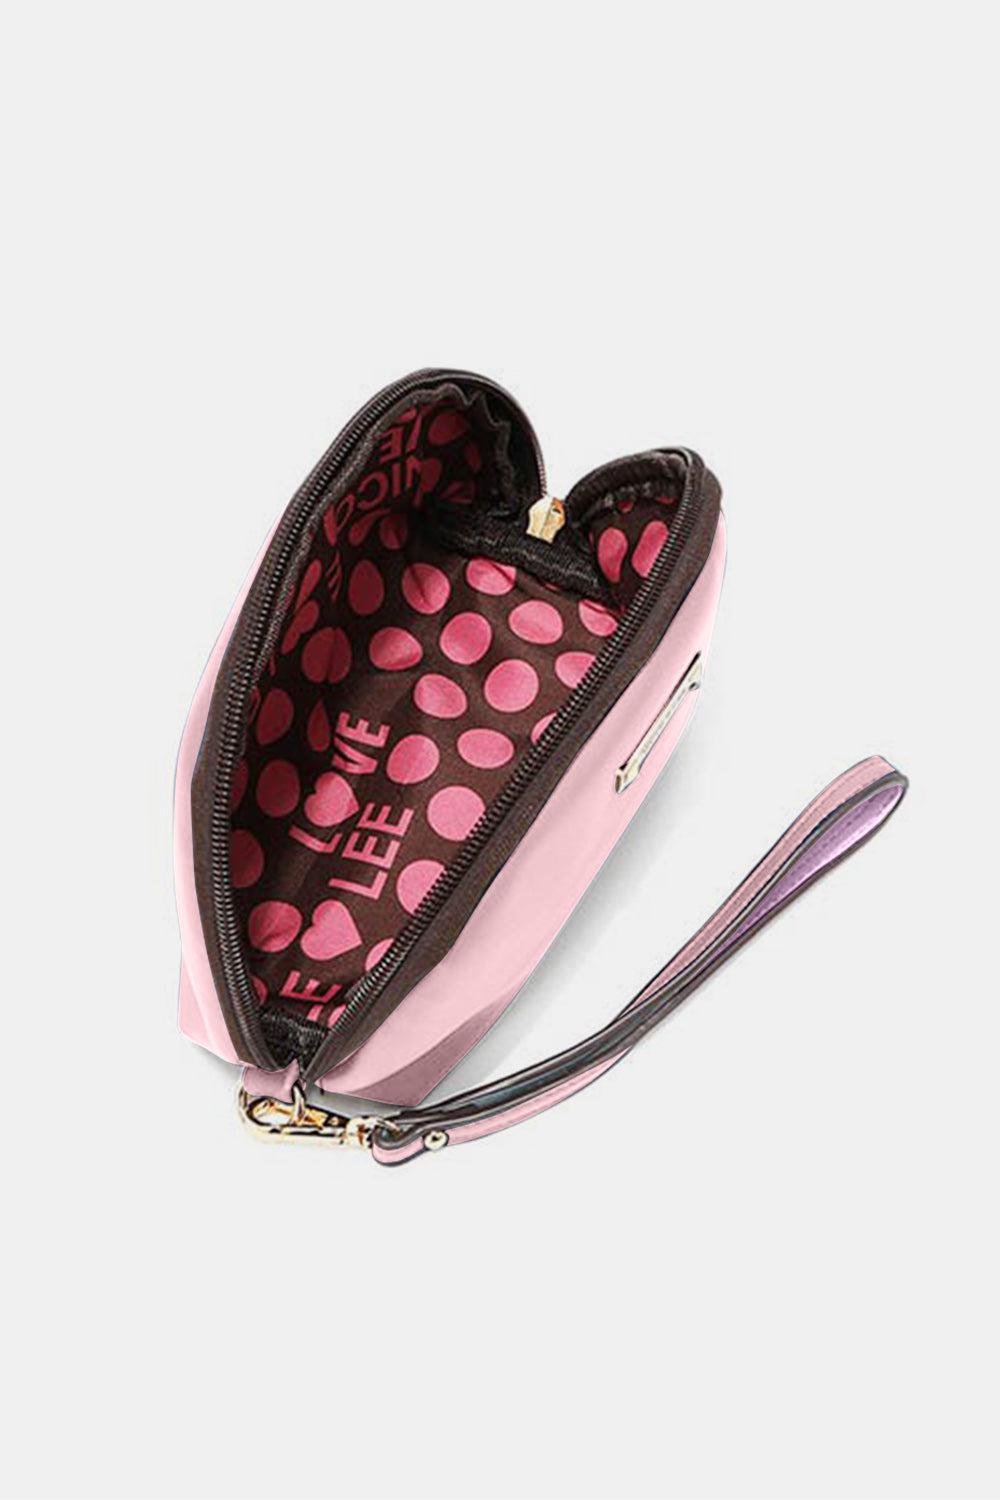 a pink heart shaped purse with a purple strap